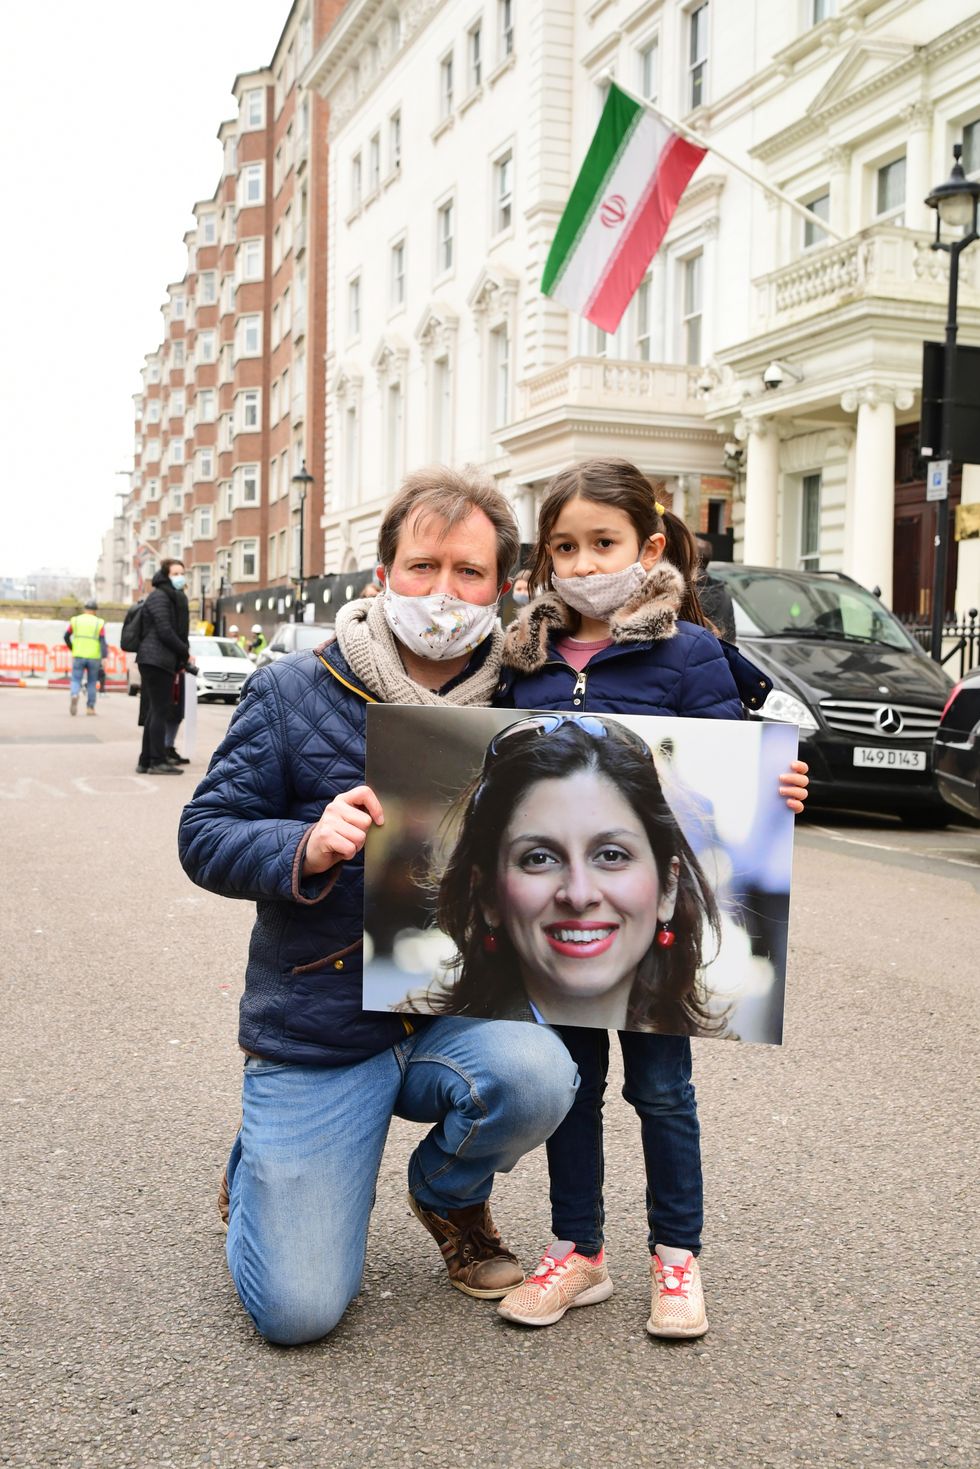 Richard Ratcliffe, the husband of Nazanin Zaghari-Ratcliffe, with his daughter Gabriella during a protest outside the Iranian Embassy in London in March 2021